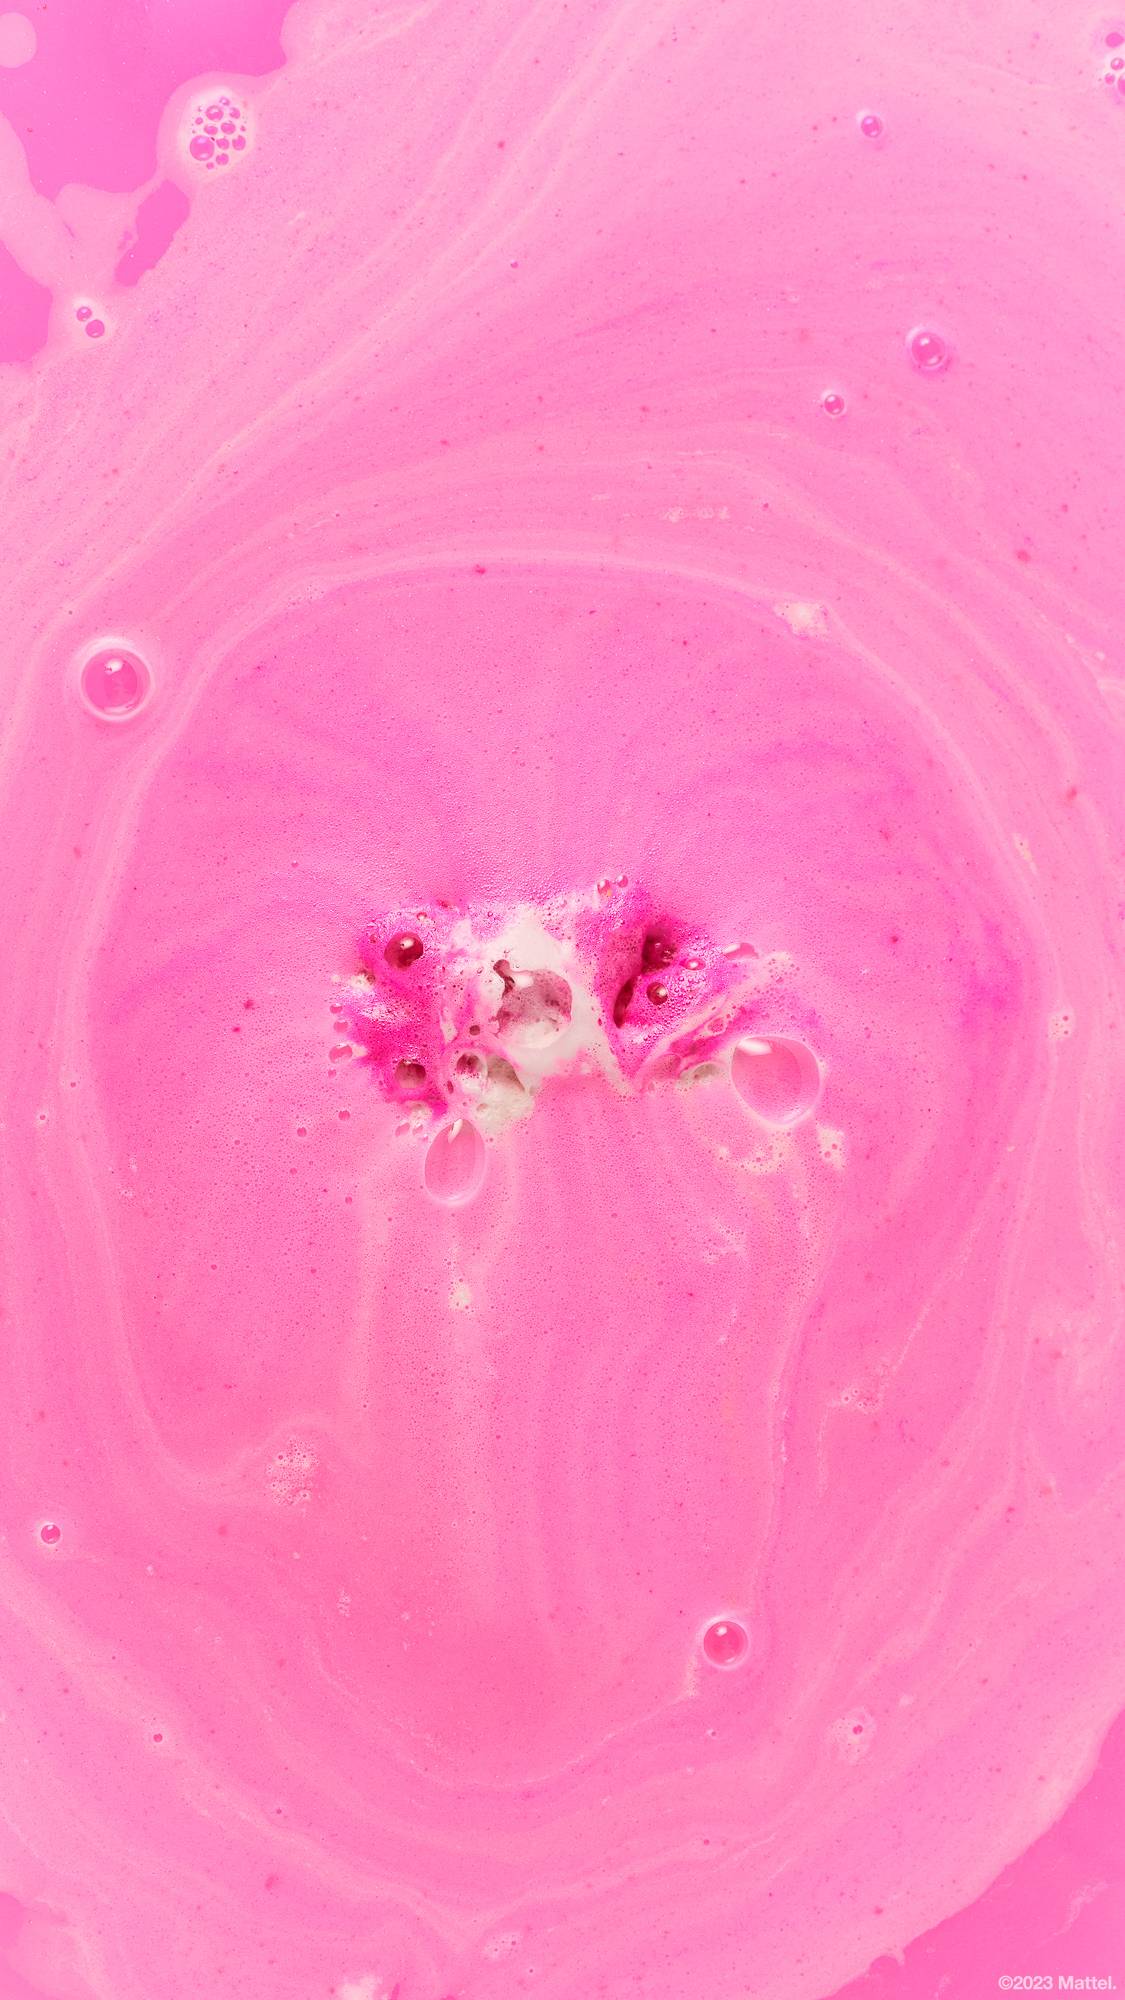 Barbie bath bomb almost completely diminished, floats on a foamy pink sea.